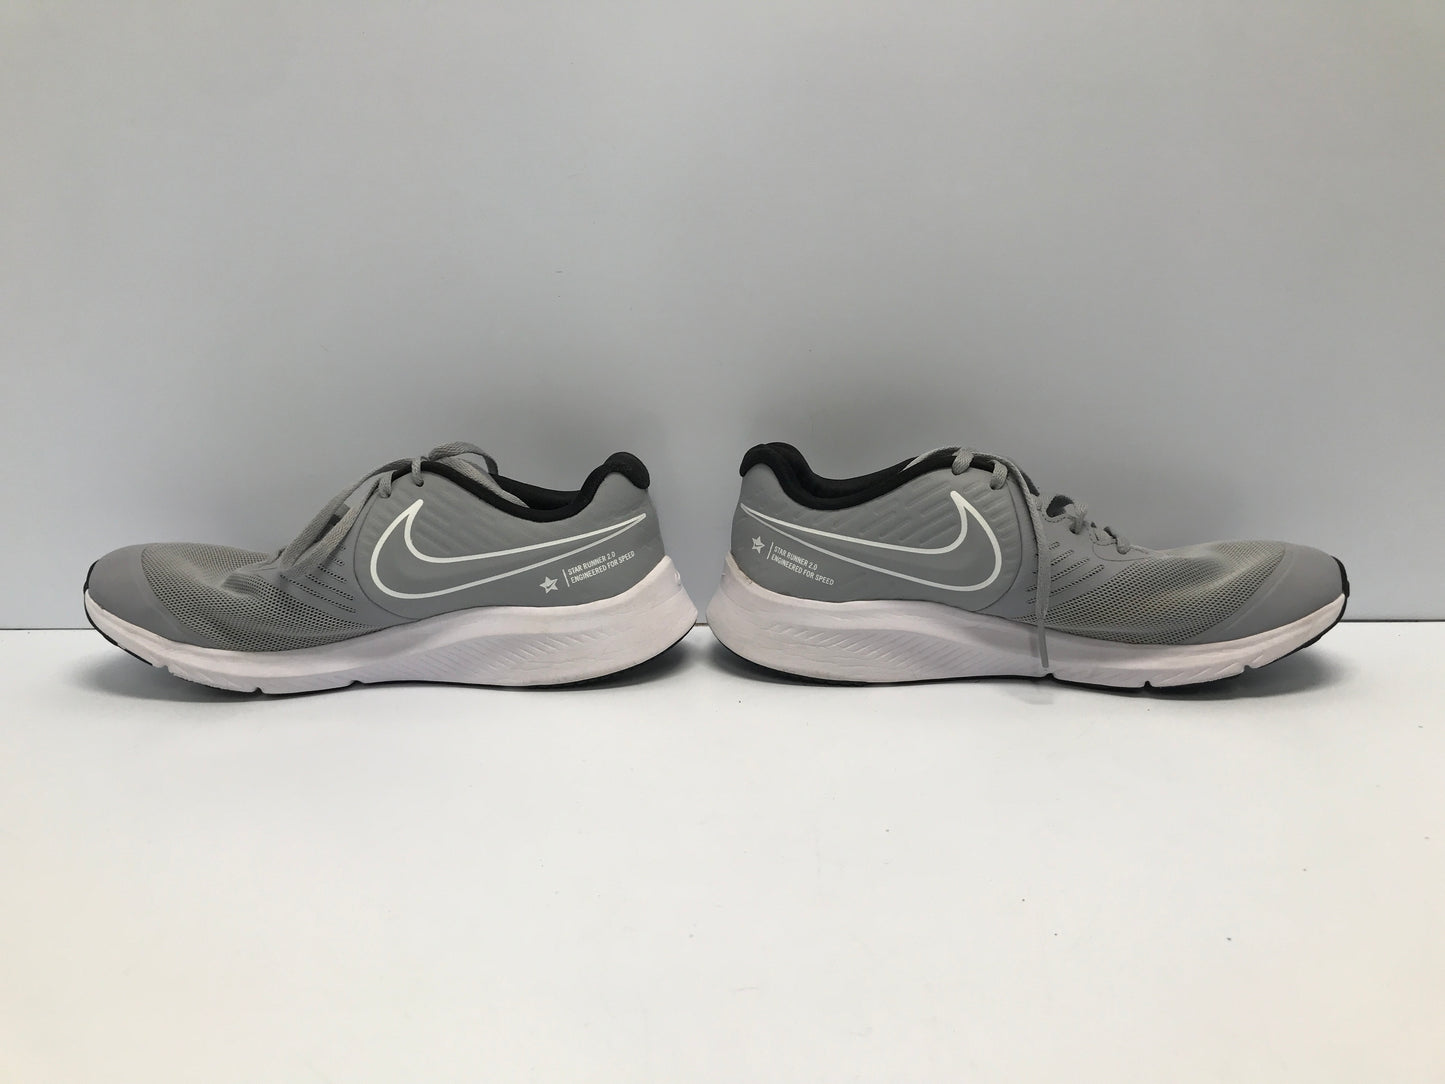 Shoes Runners Men's Size 7 Nike Grey White Excellent